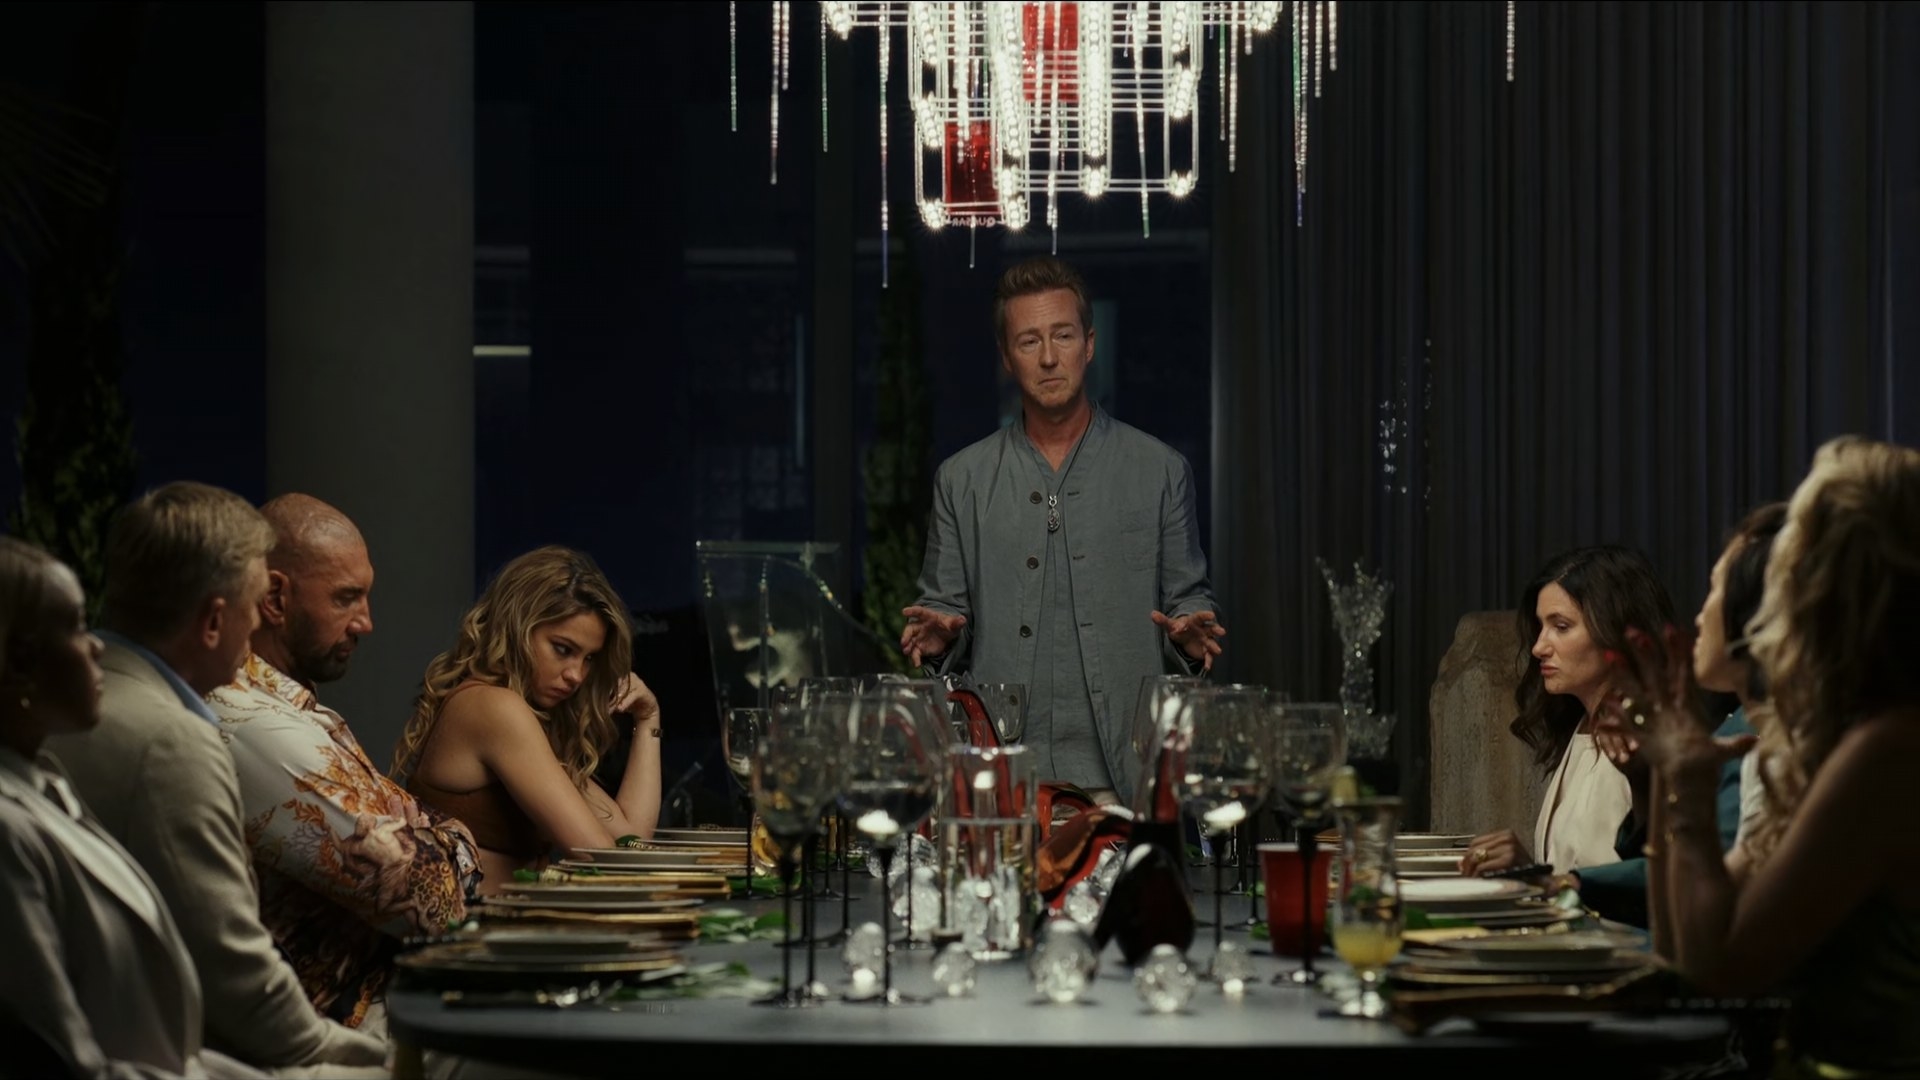 Edward Norton talks to his guests as they are sitting around a dining table